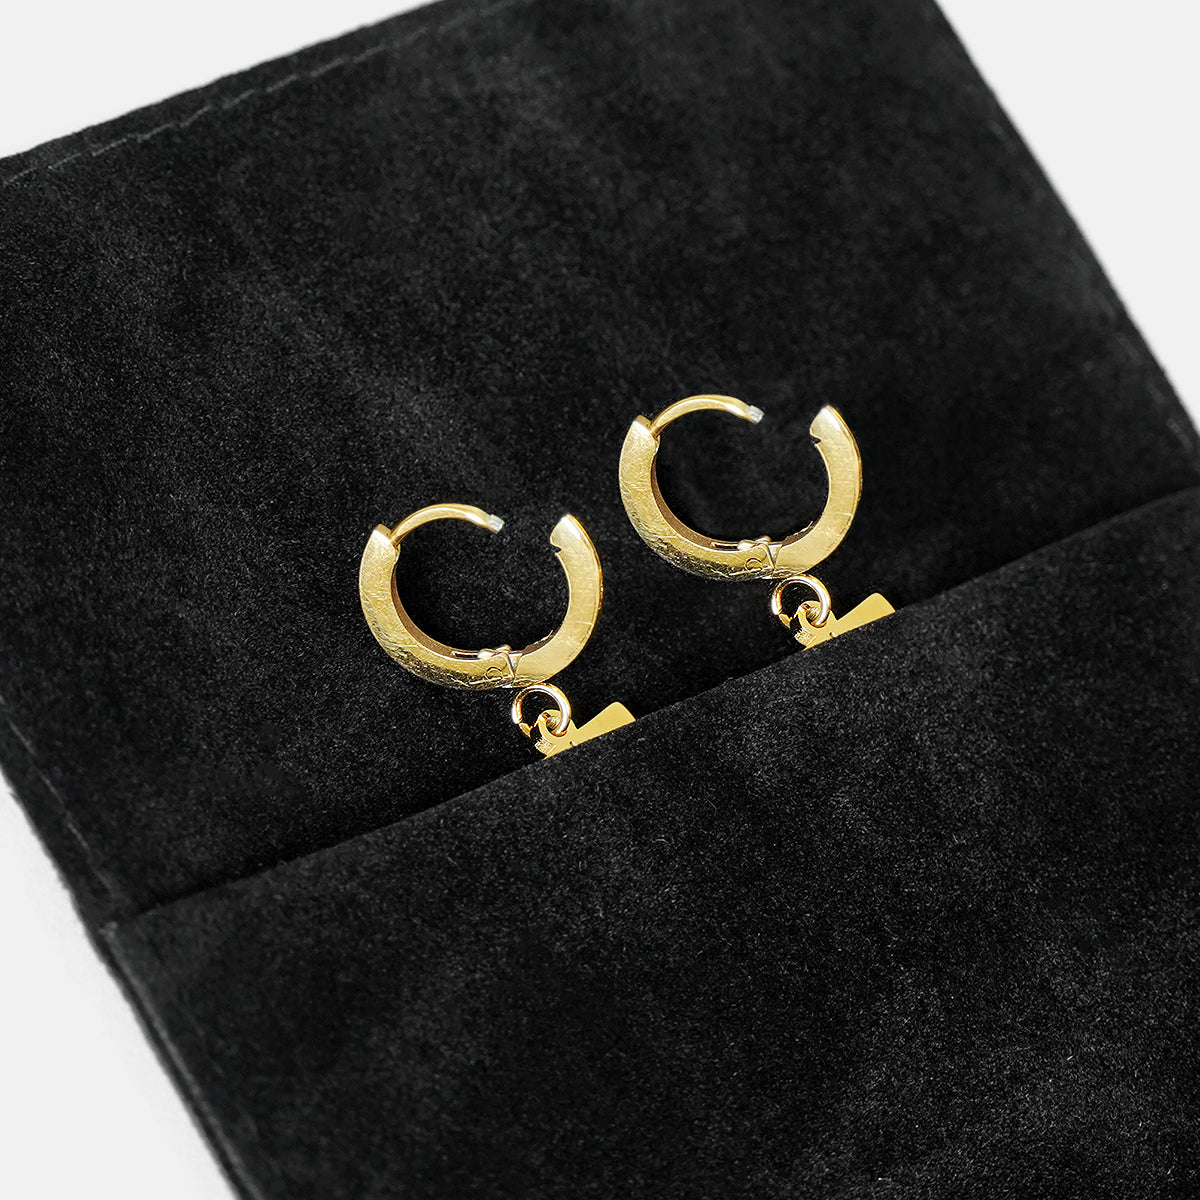 86 Number Earring - Gold Plated Stainless Steel